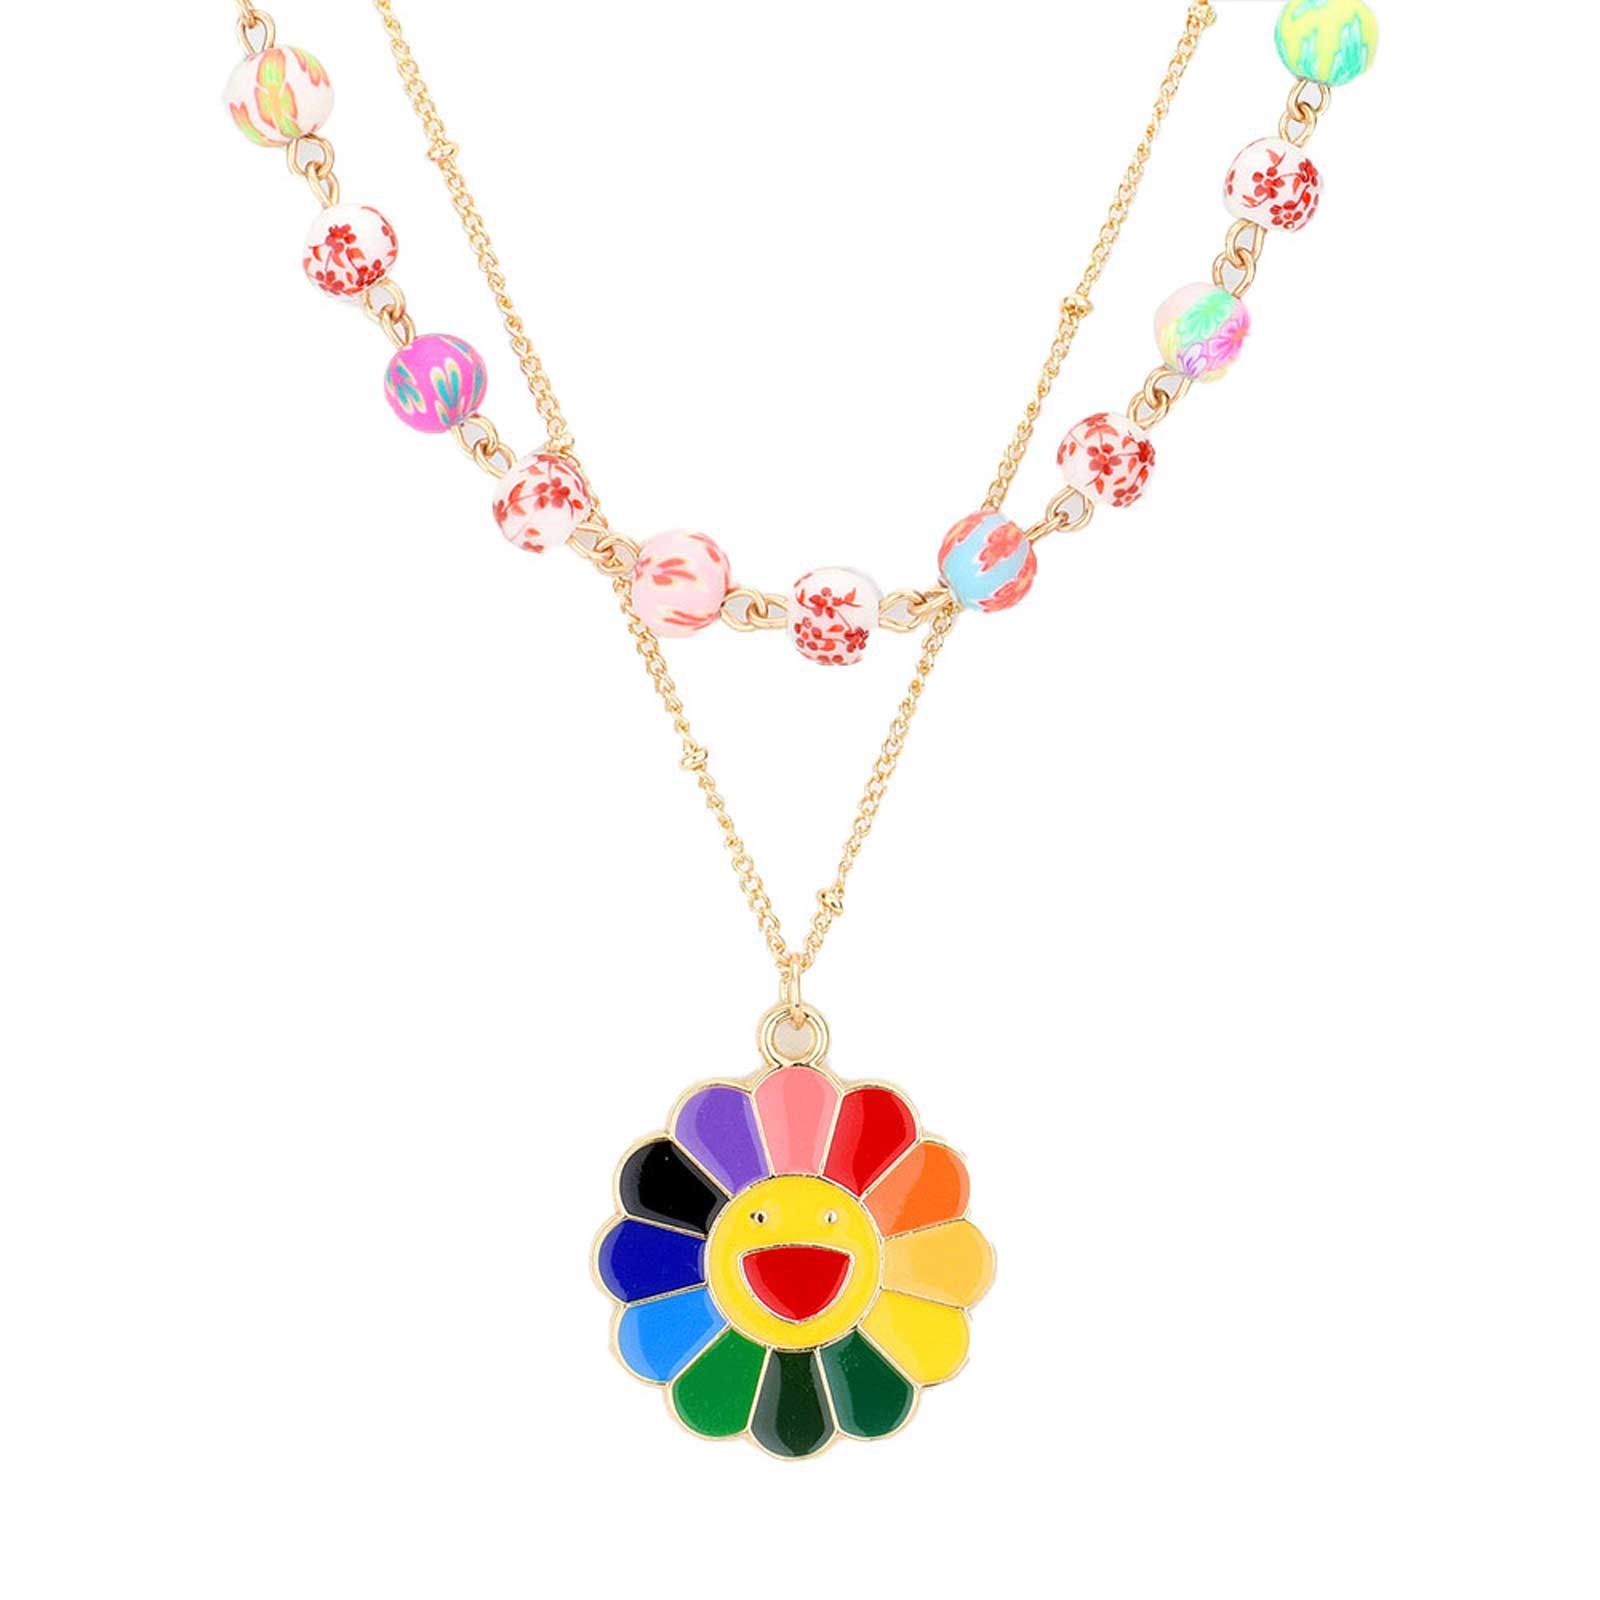 Multi Enamel Smile Pendant Flower Patterned Beaded Double Layered Necklace, put on a pop of color to complete your ensemble. Perfect for adding just the right amount of shimmer & shine and a touch of class to special events. Perfect Birthday Gift, Anniversary Gift, Mother's Day Gift, Graduation Gift, Valentine’s Gift.